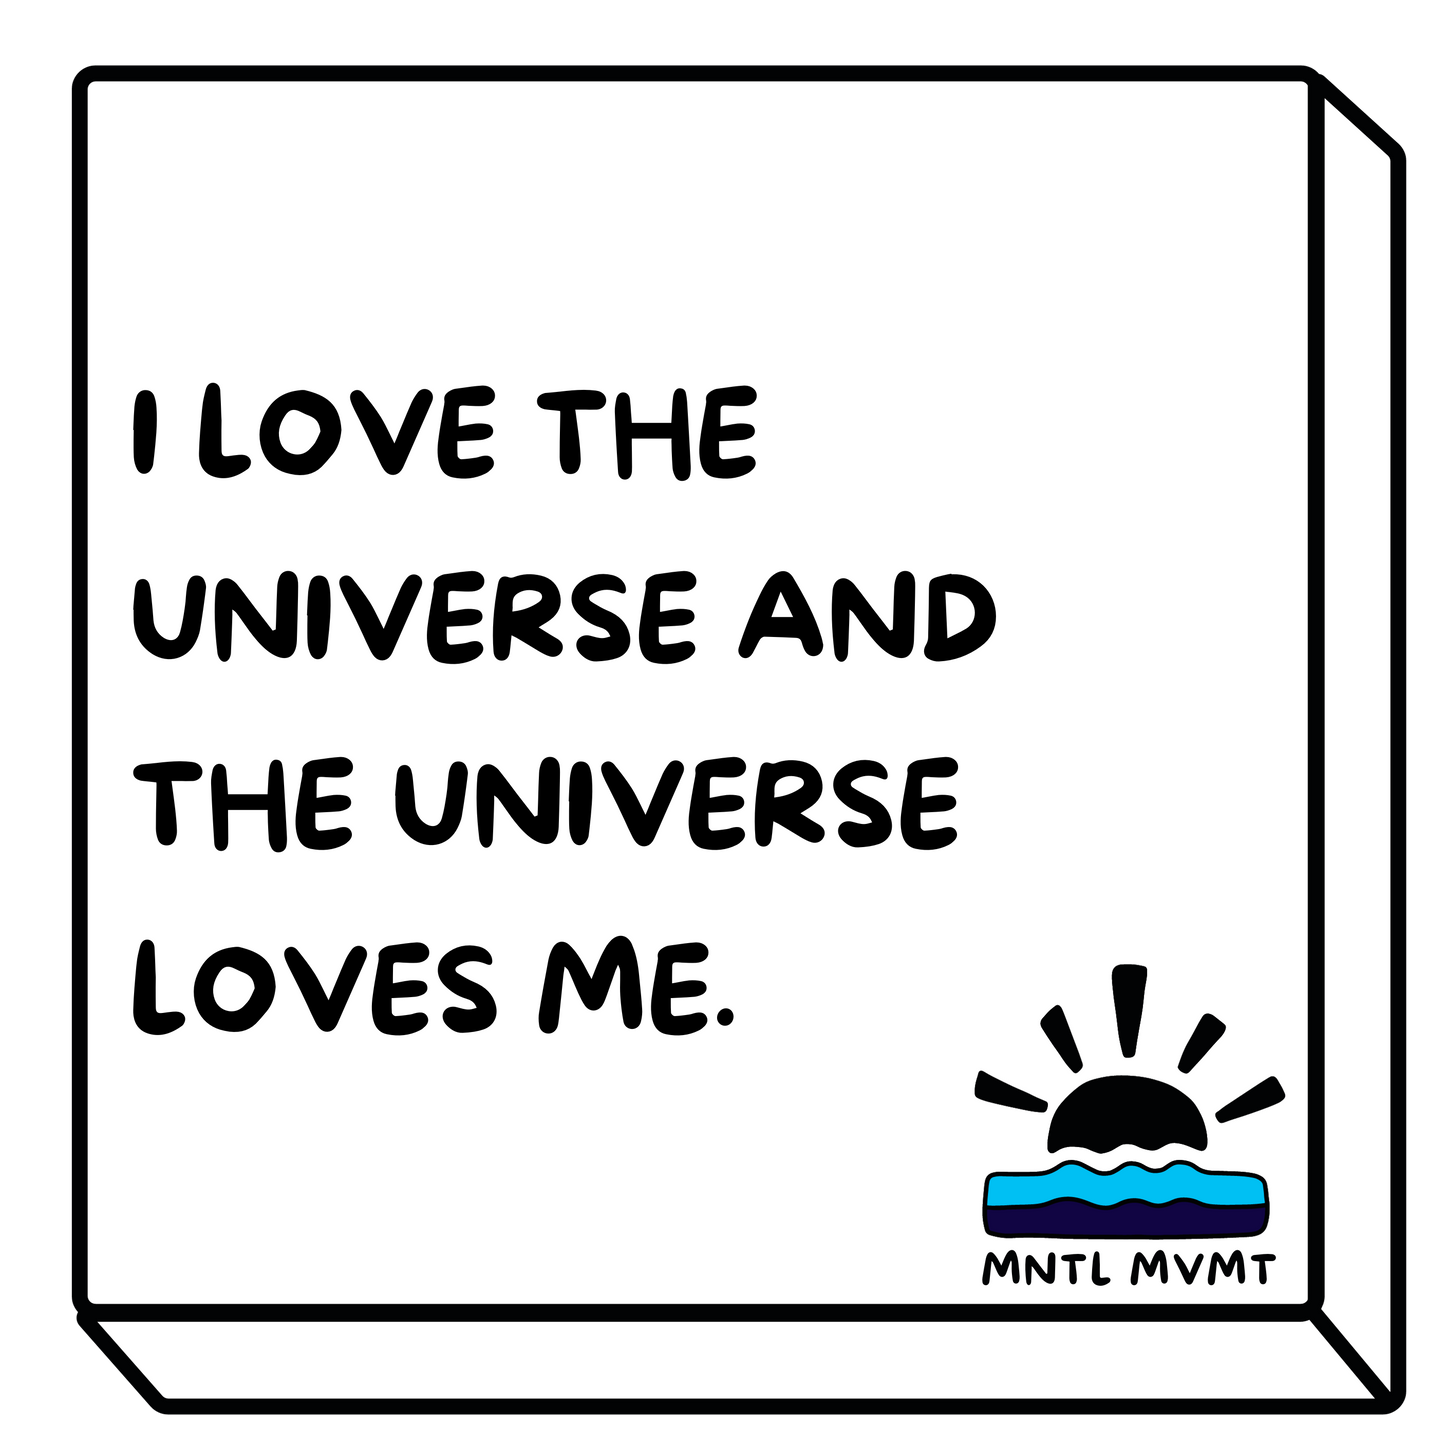 I LOVE THE UNIVERSE AND THE UNIVERSE LOVES ME.